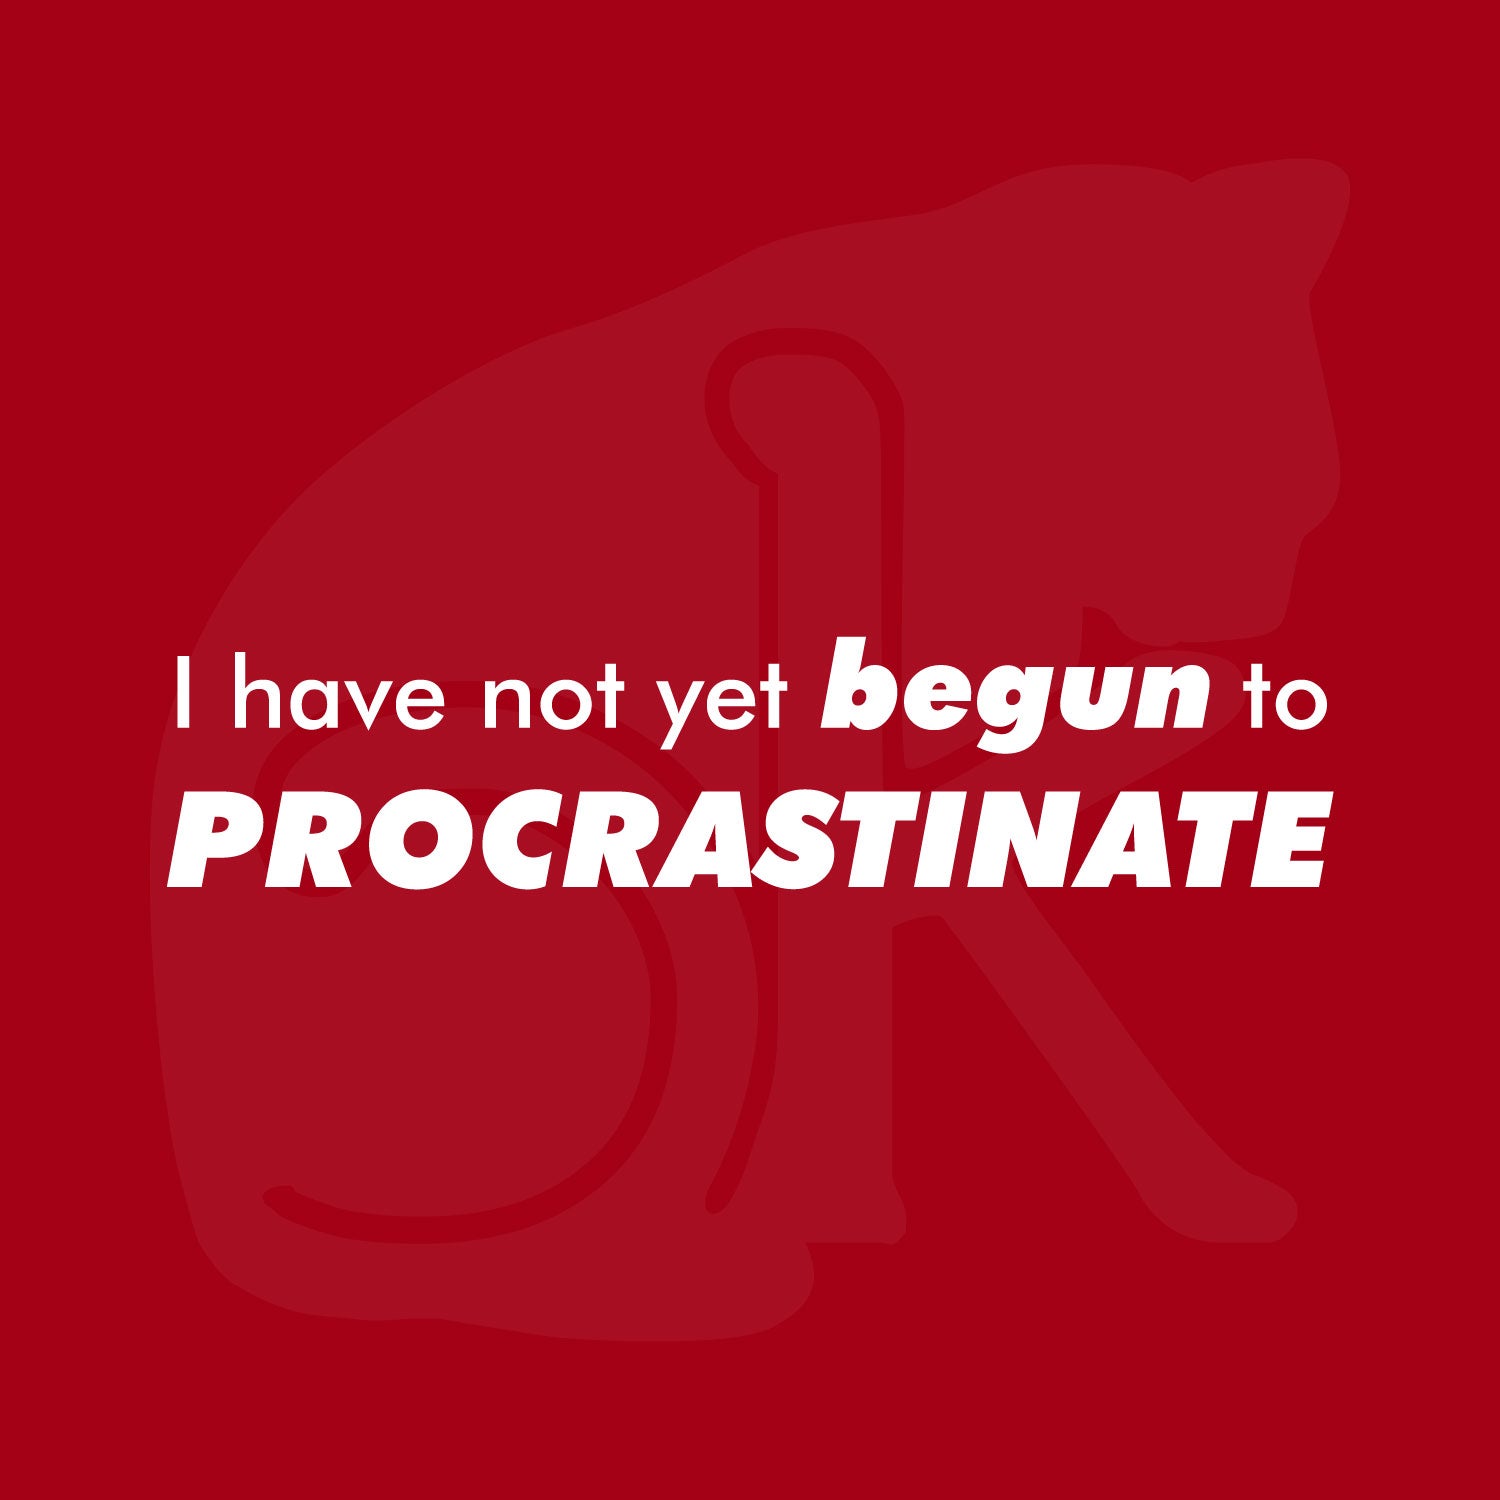 Standalone text graphic: "I have not yet BEGUN to PROCRASTINATE"